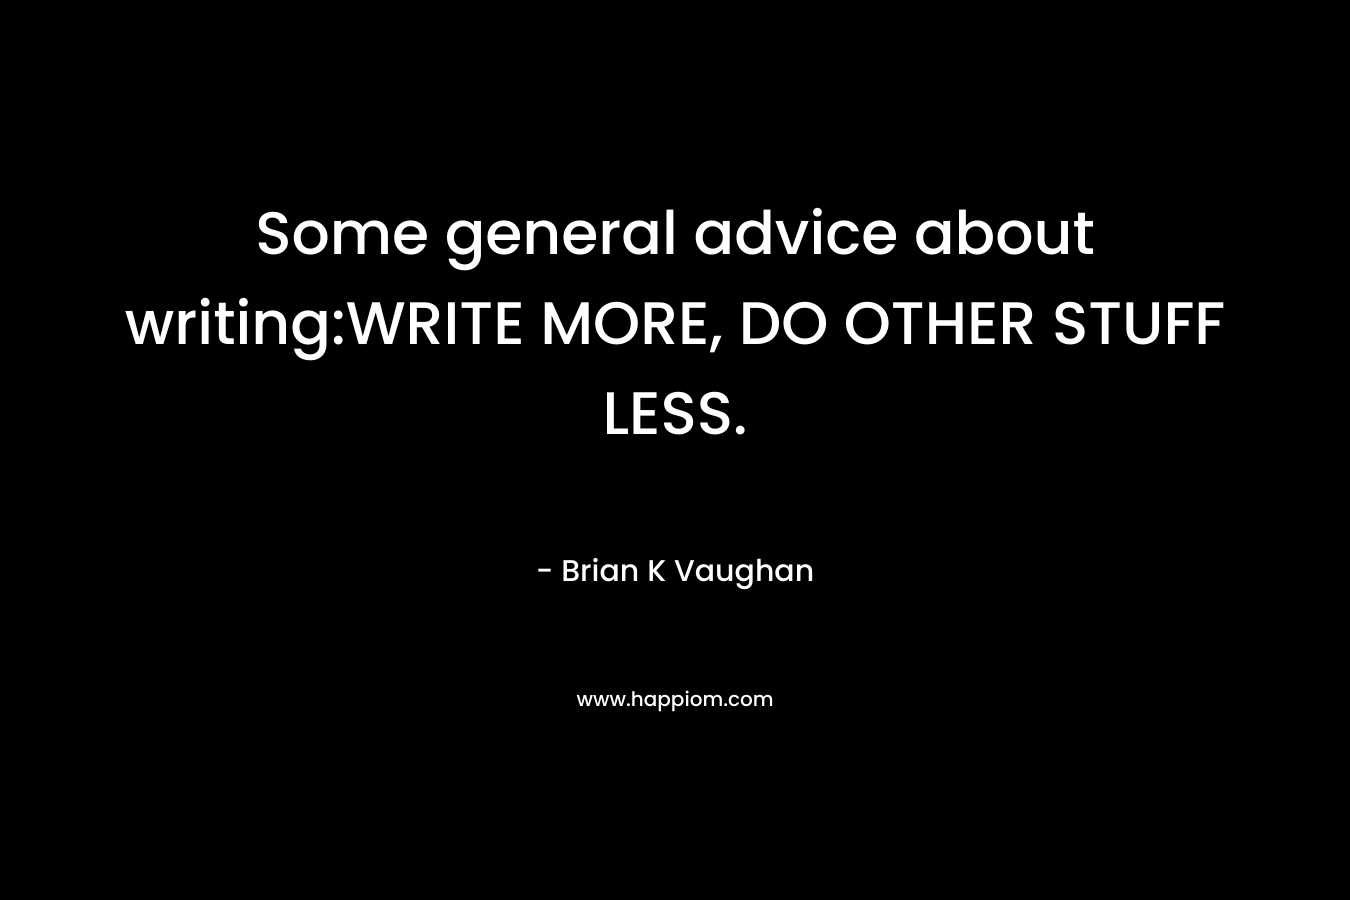 Some general advice about writing:WRITE MORE, DO OTHER STUFF LESS.